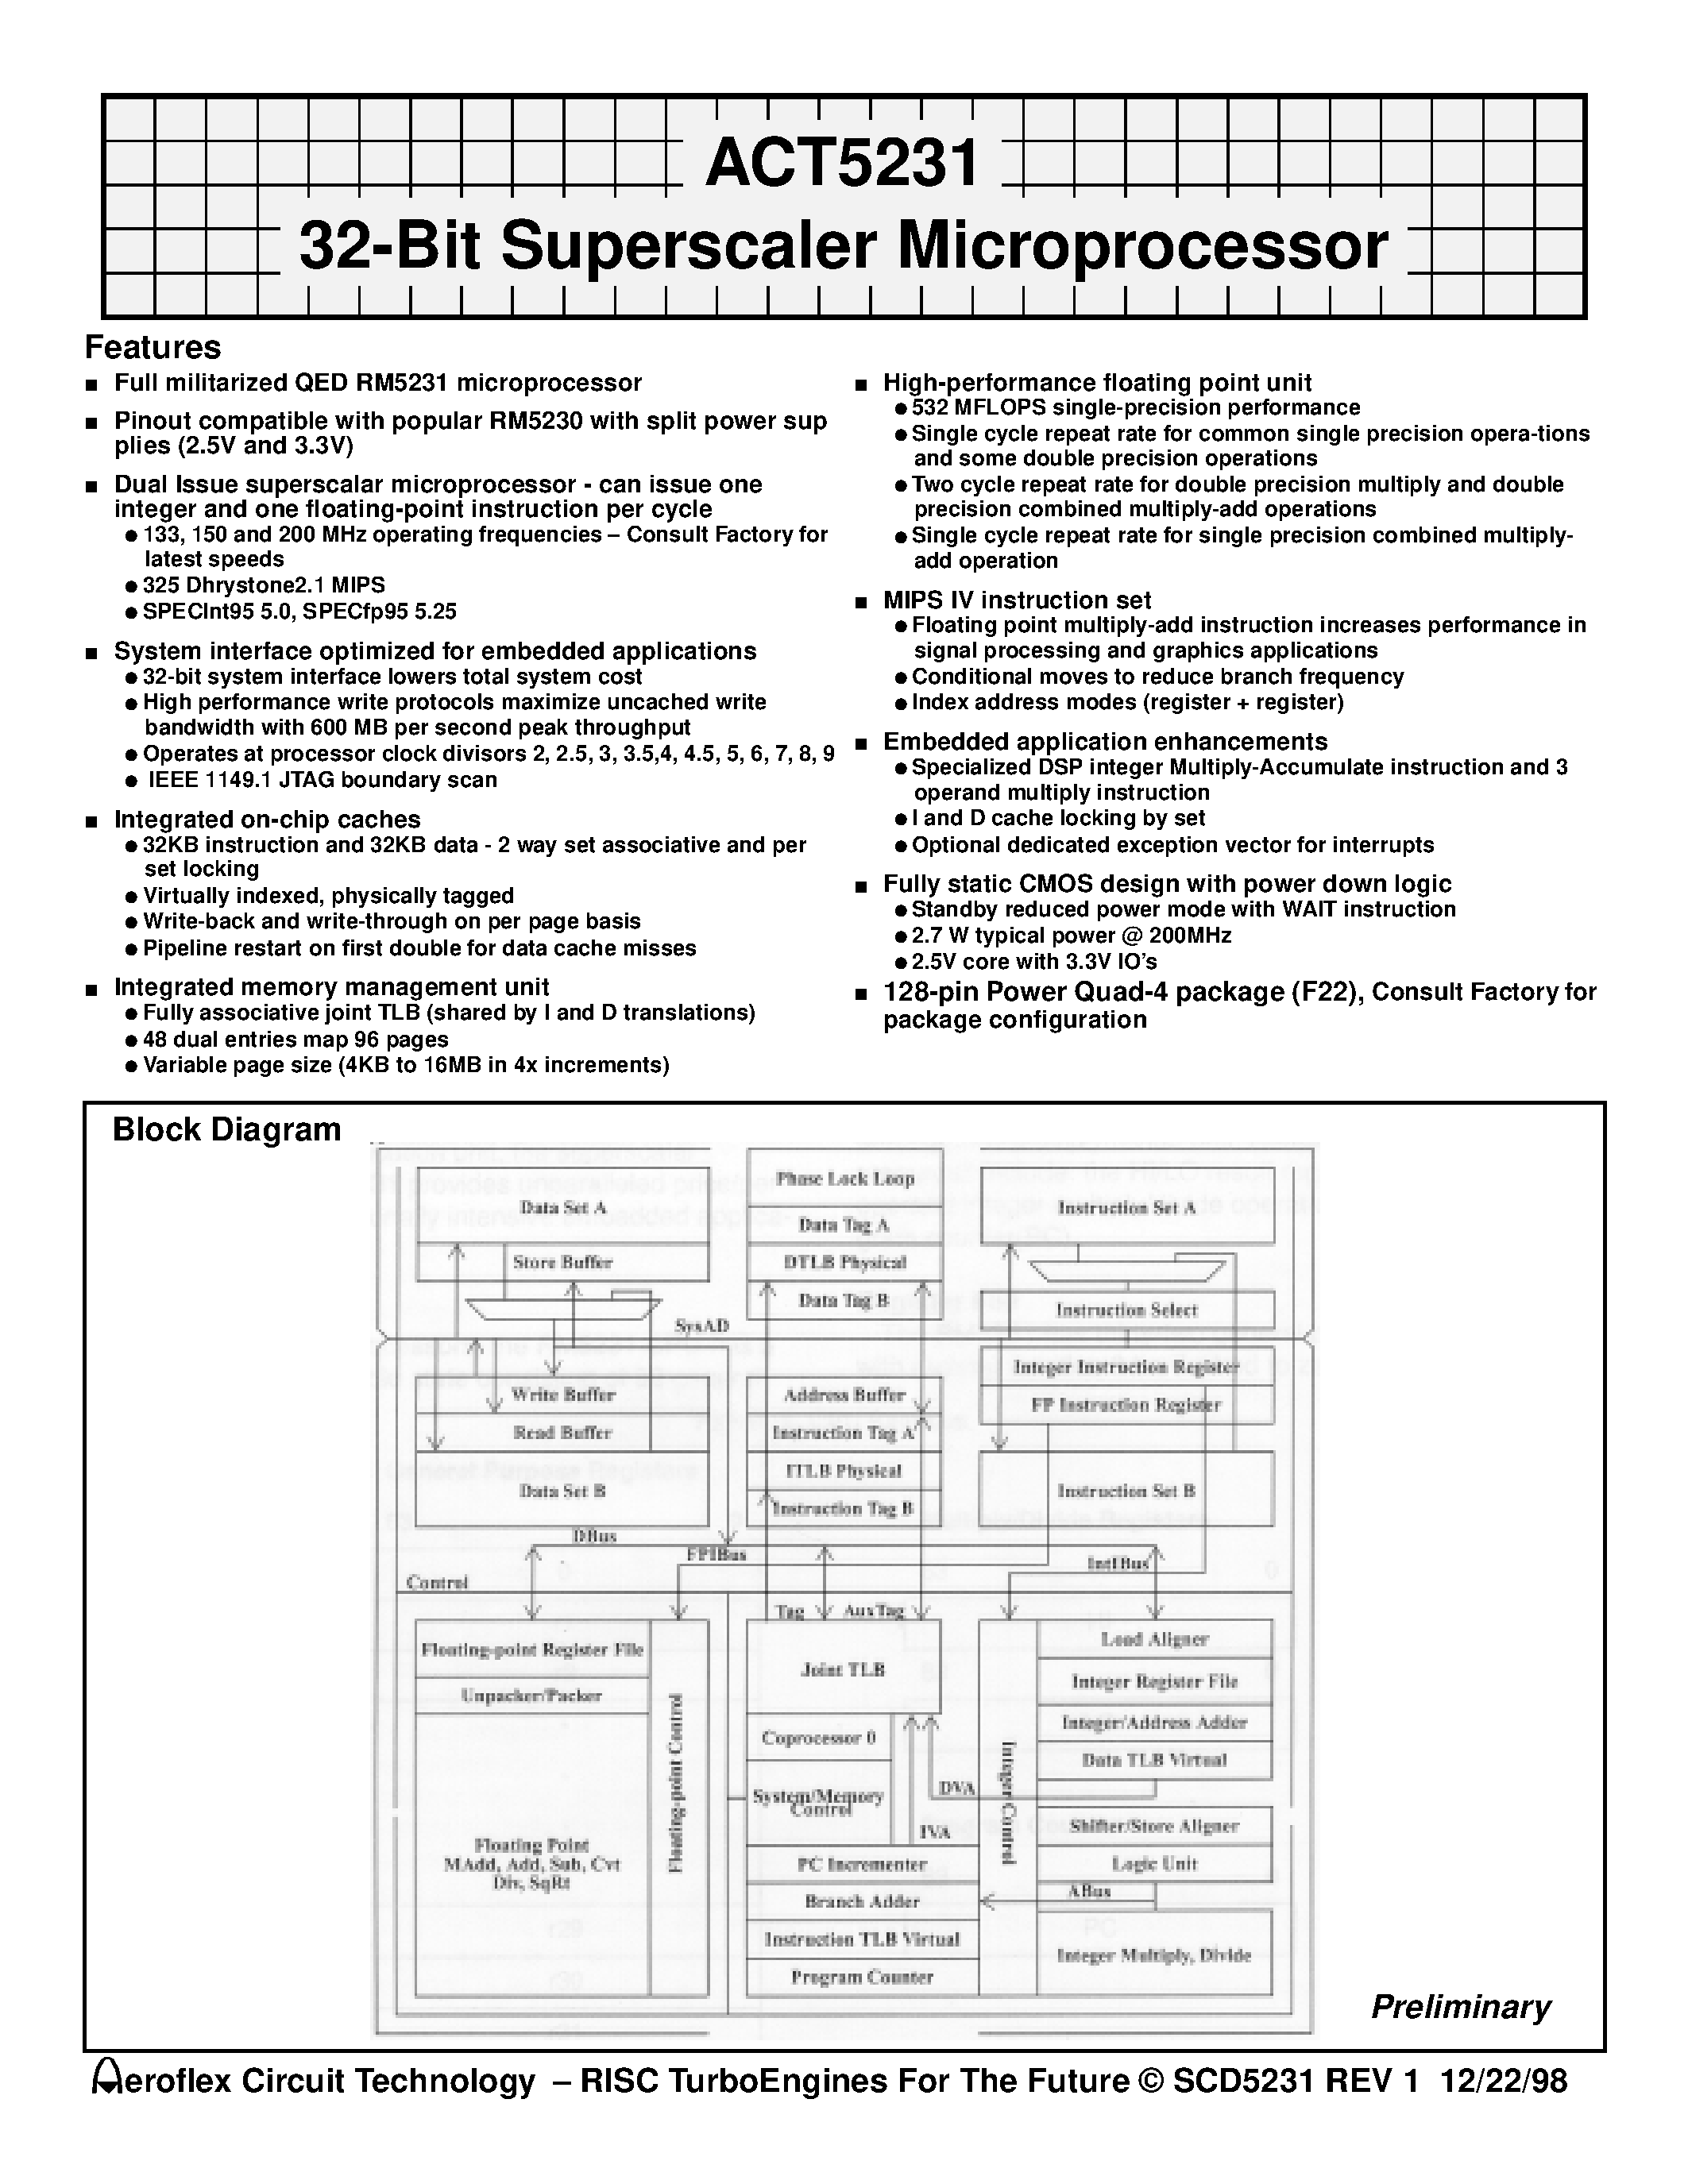 Datasheet ACT-5231PC-133F22M - ACT5231 32-Bit Superscaler Microprocessor page 1